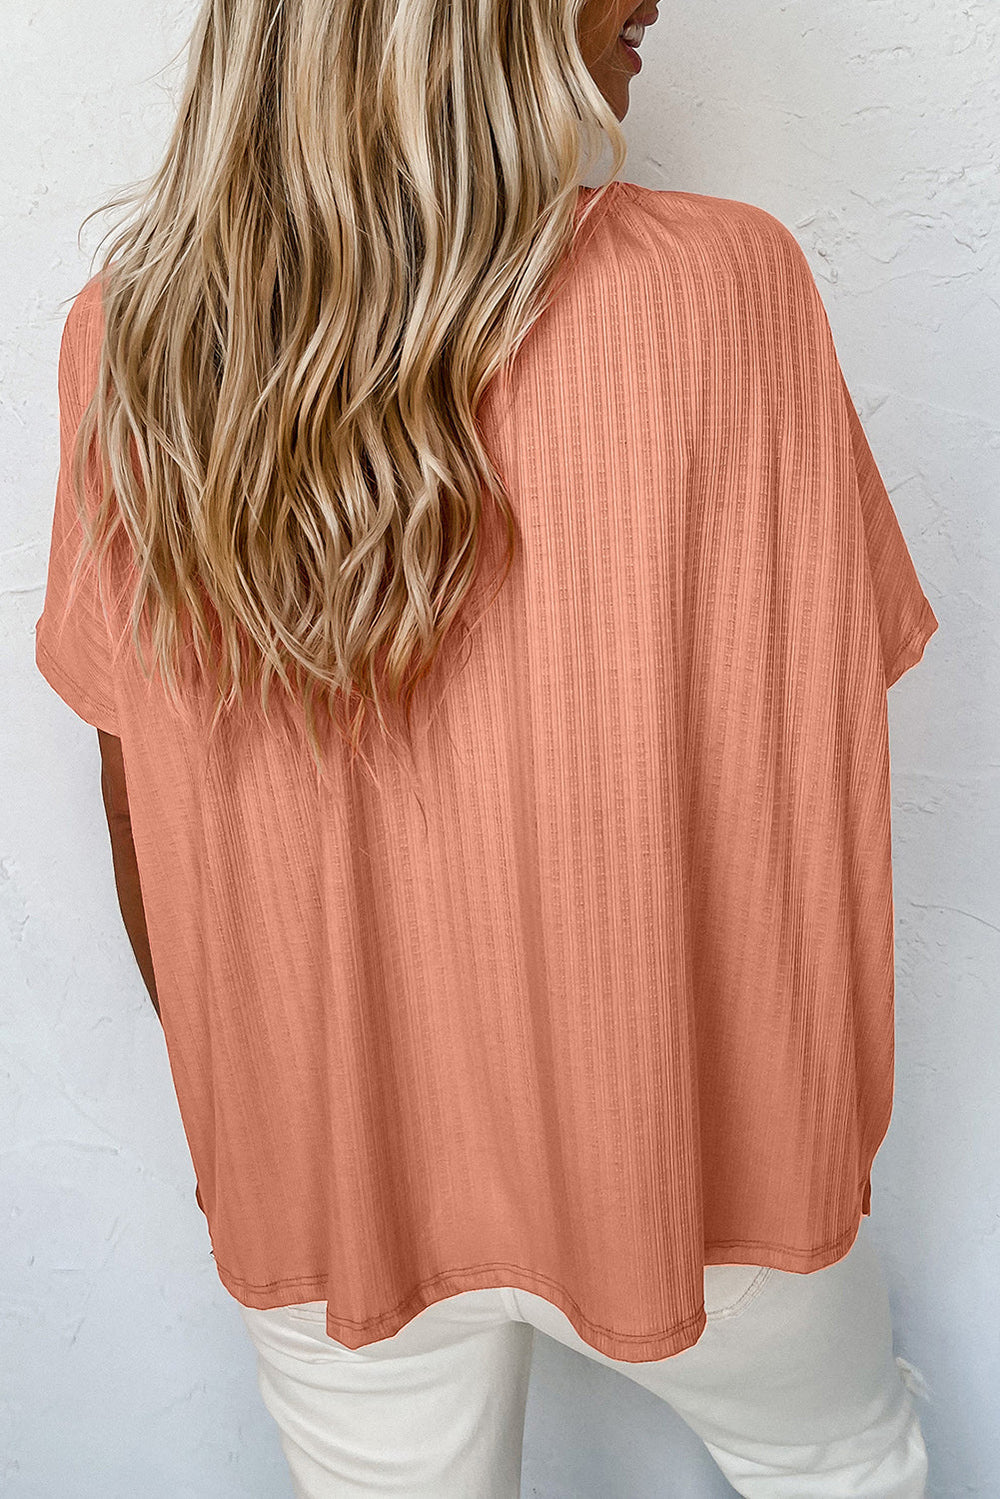 Notched V Neck Buttoned Front Textured Loose Top Ti Amo I love you